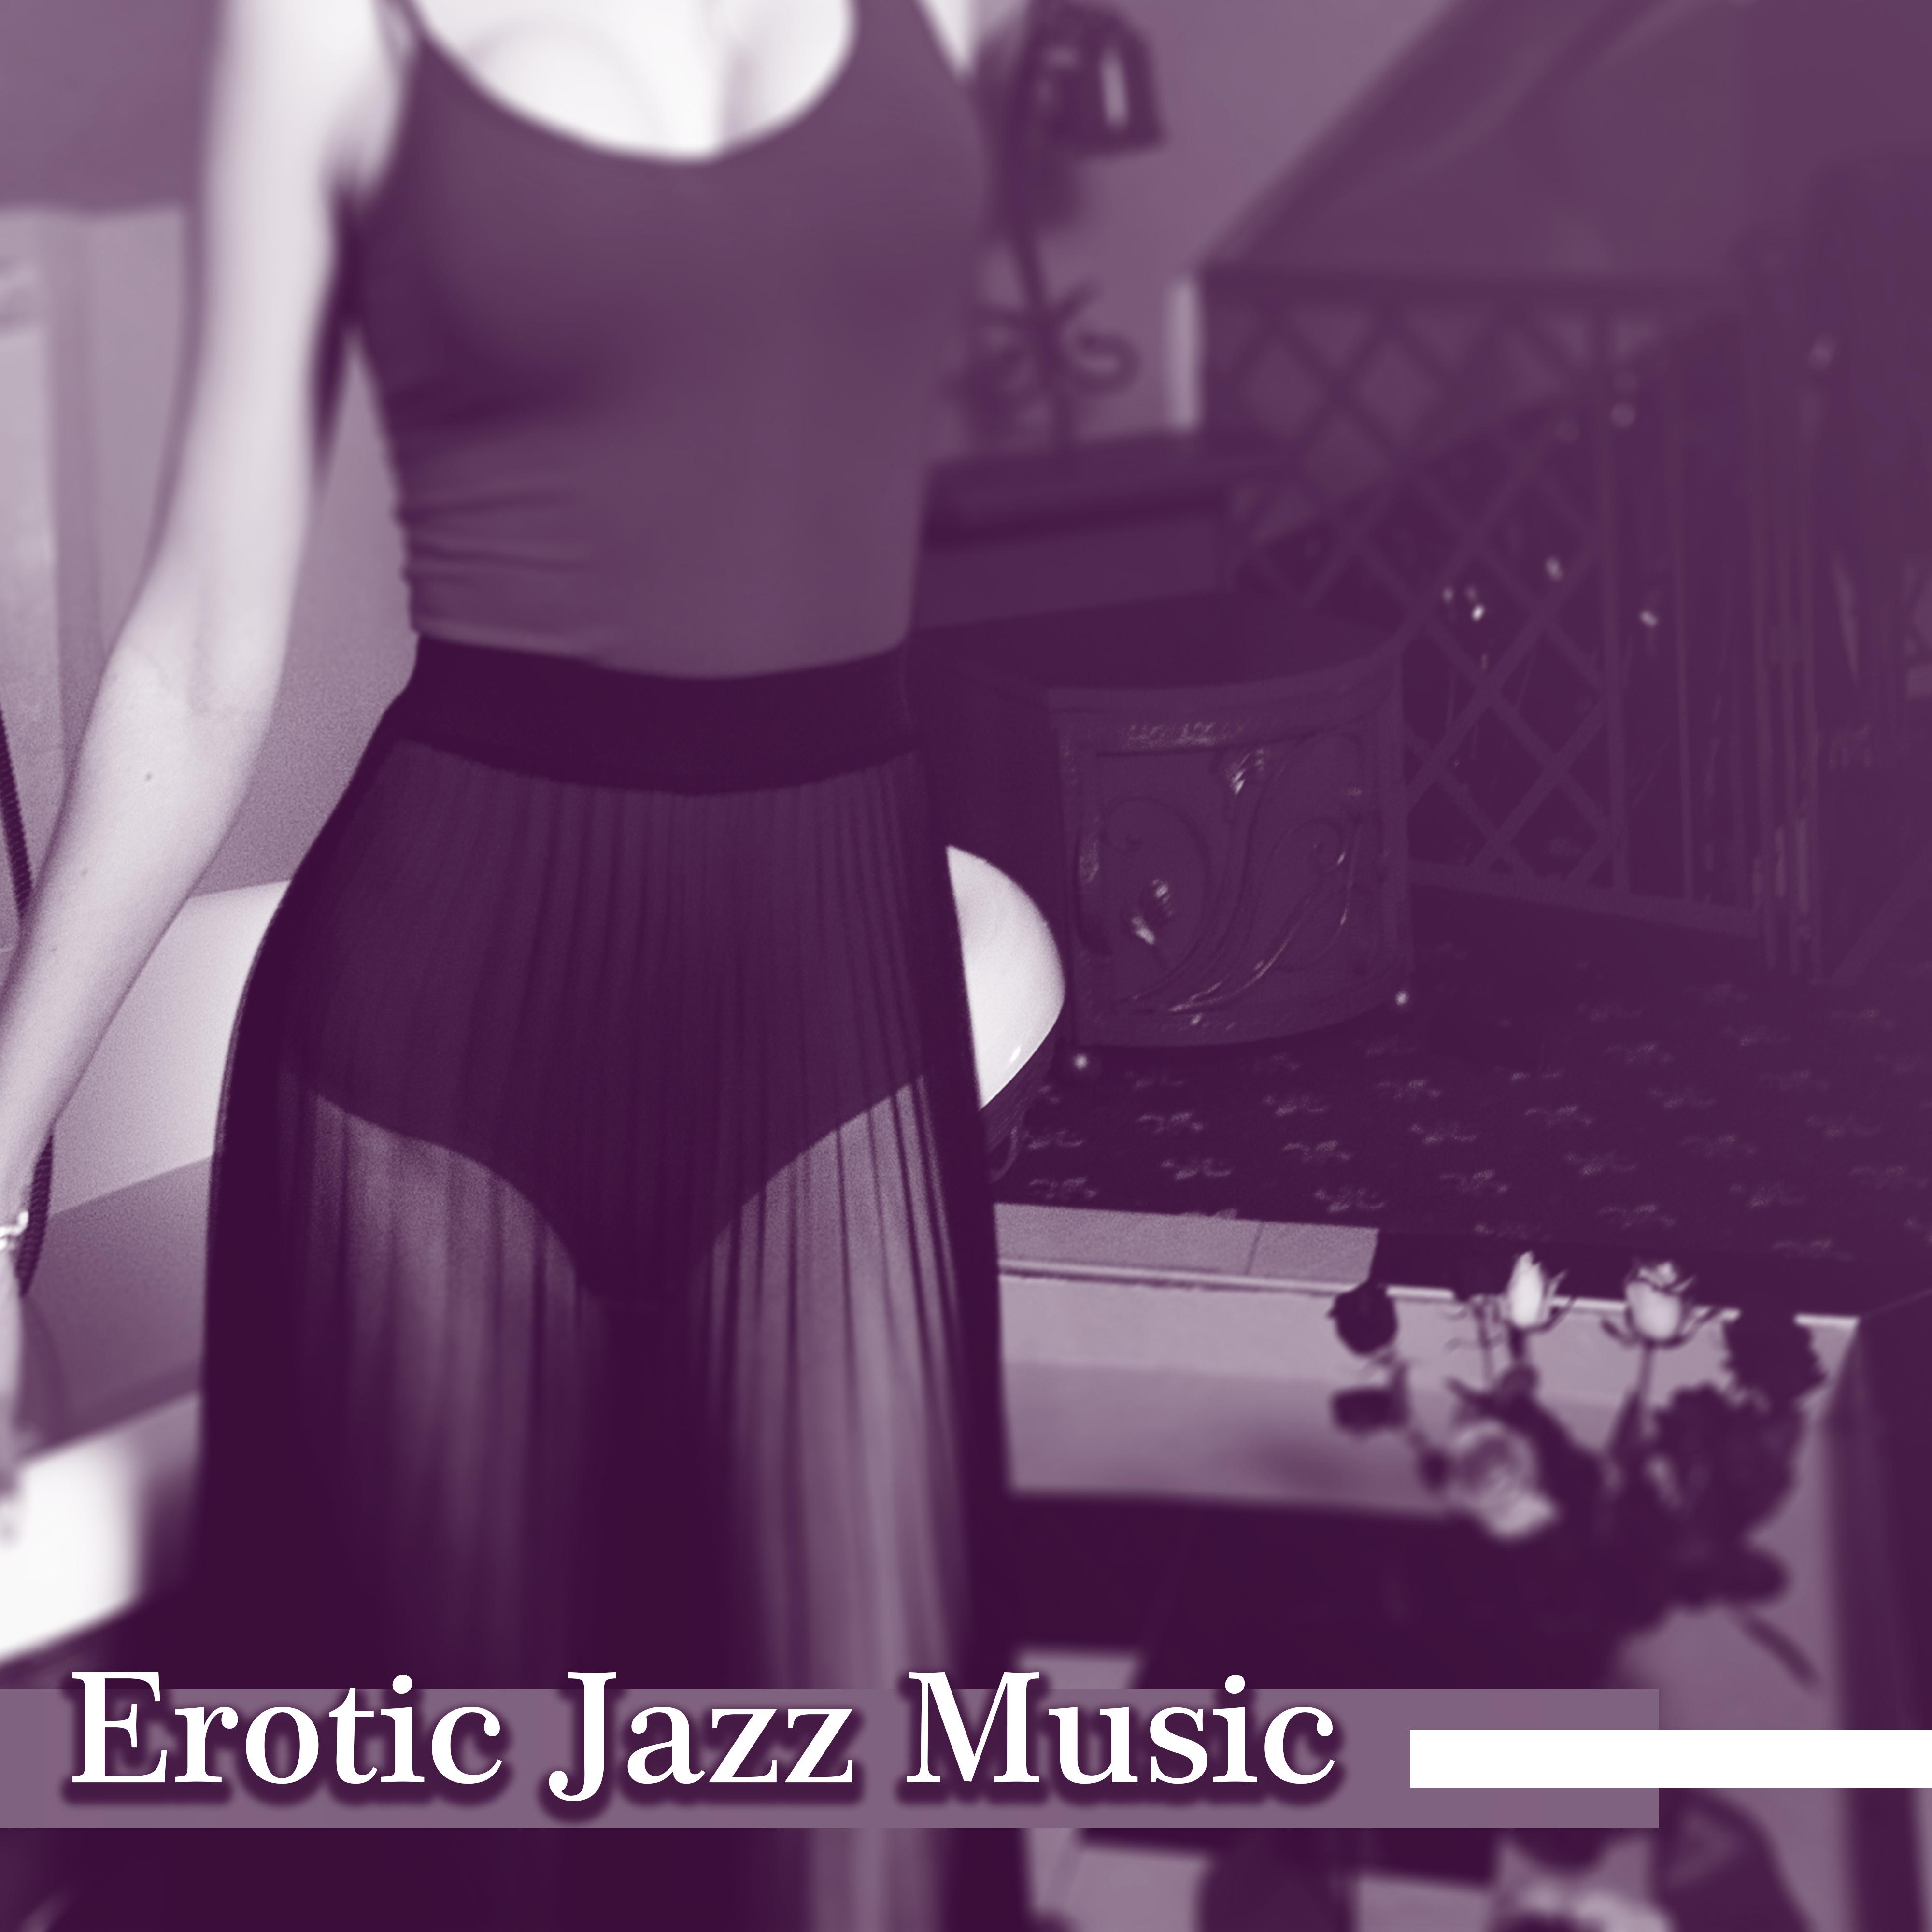 Erotic Jazz Music  Music for Lovers, Hot Jazz Vibes, Romantic Instrumental Sounds